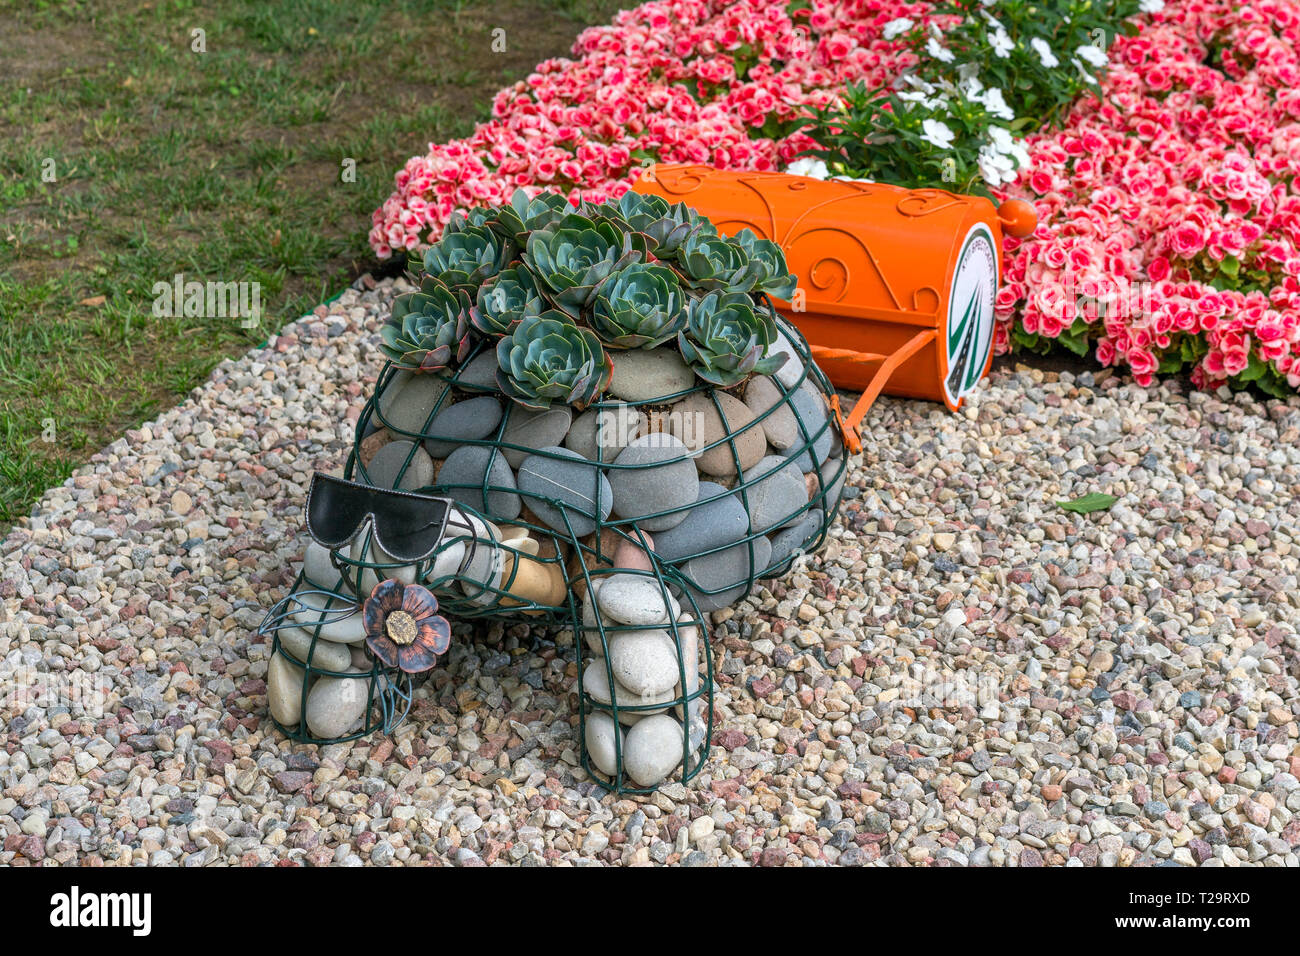 Brest, Belarus - July 28, 2018: A turtle made from  stones Stock Photo